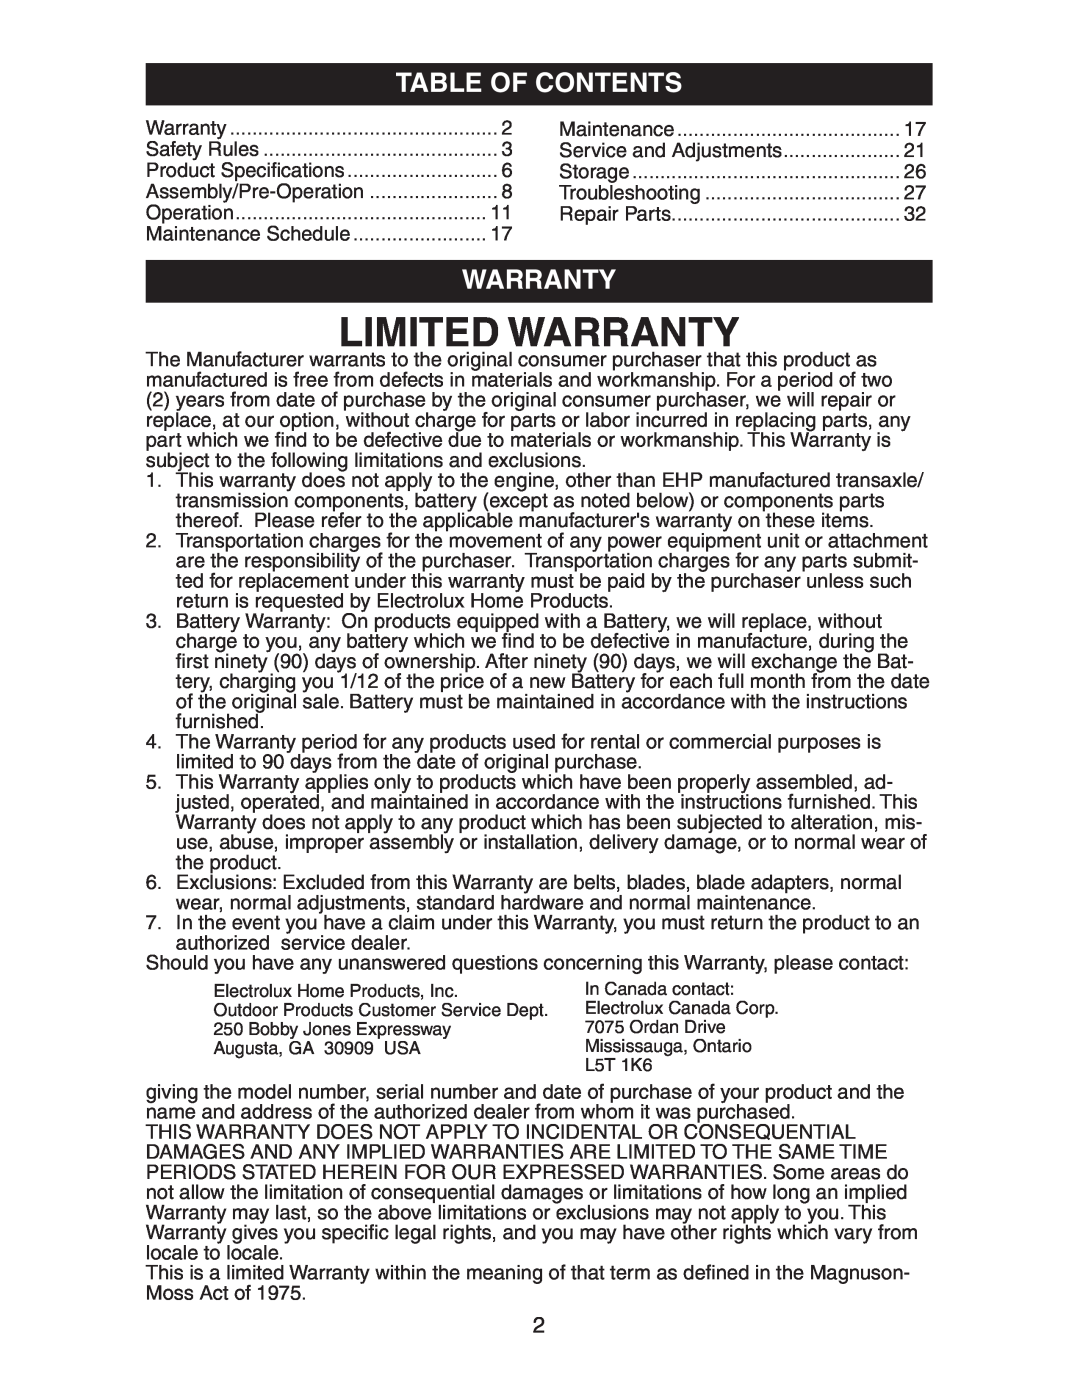 Electrolux AG17542STA manual Table Of Contents, Limited Warranty 